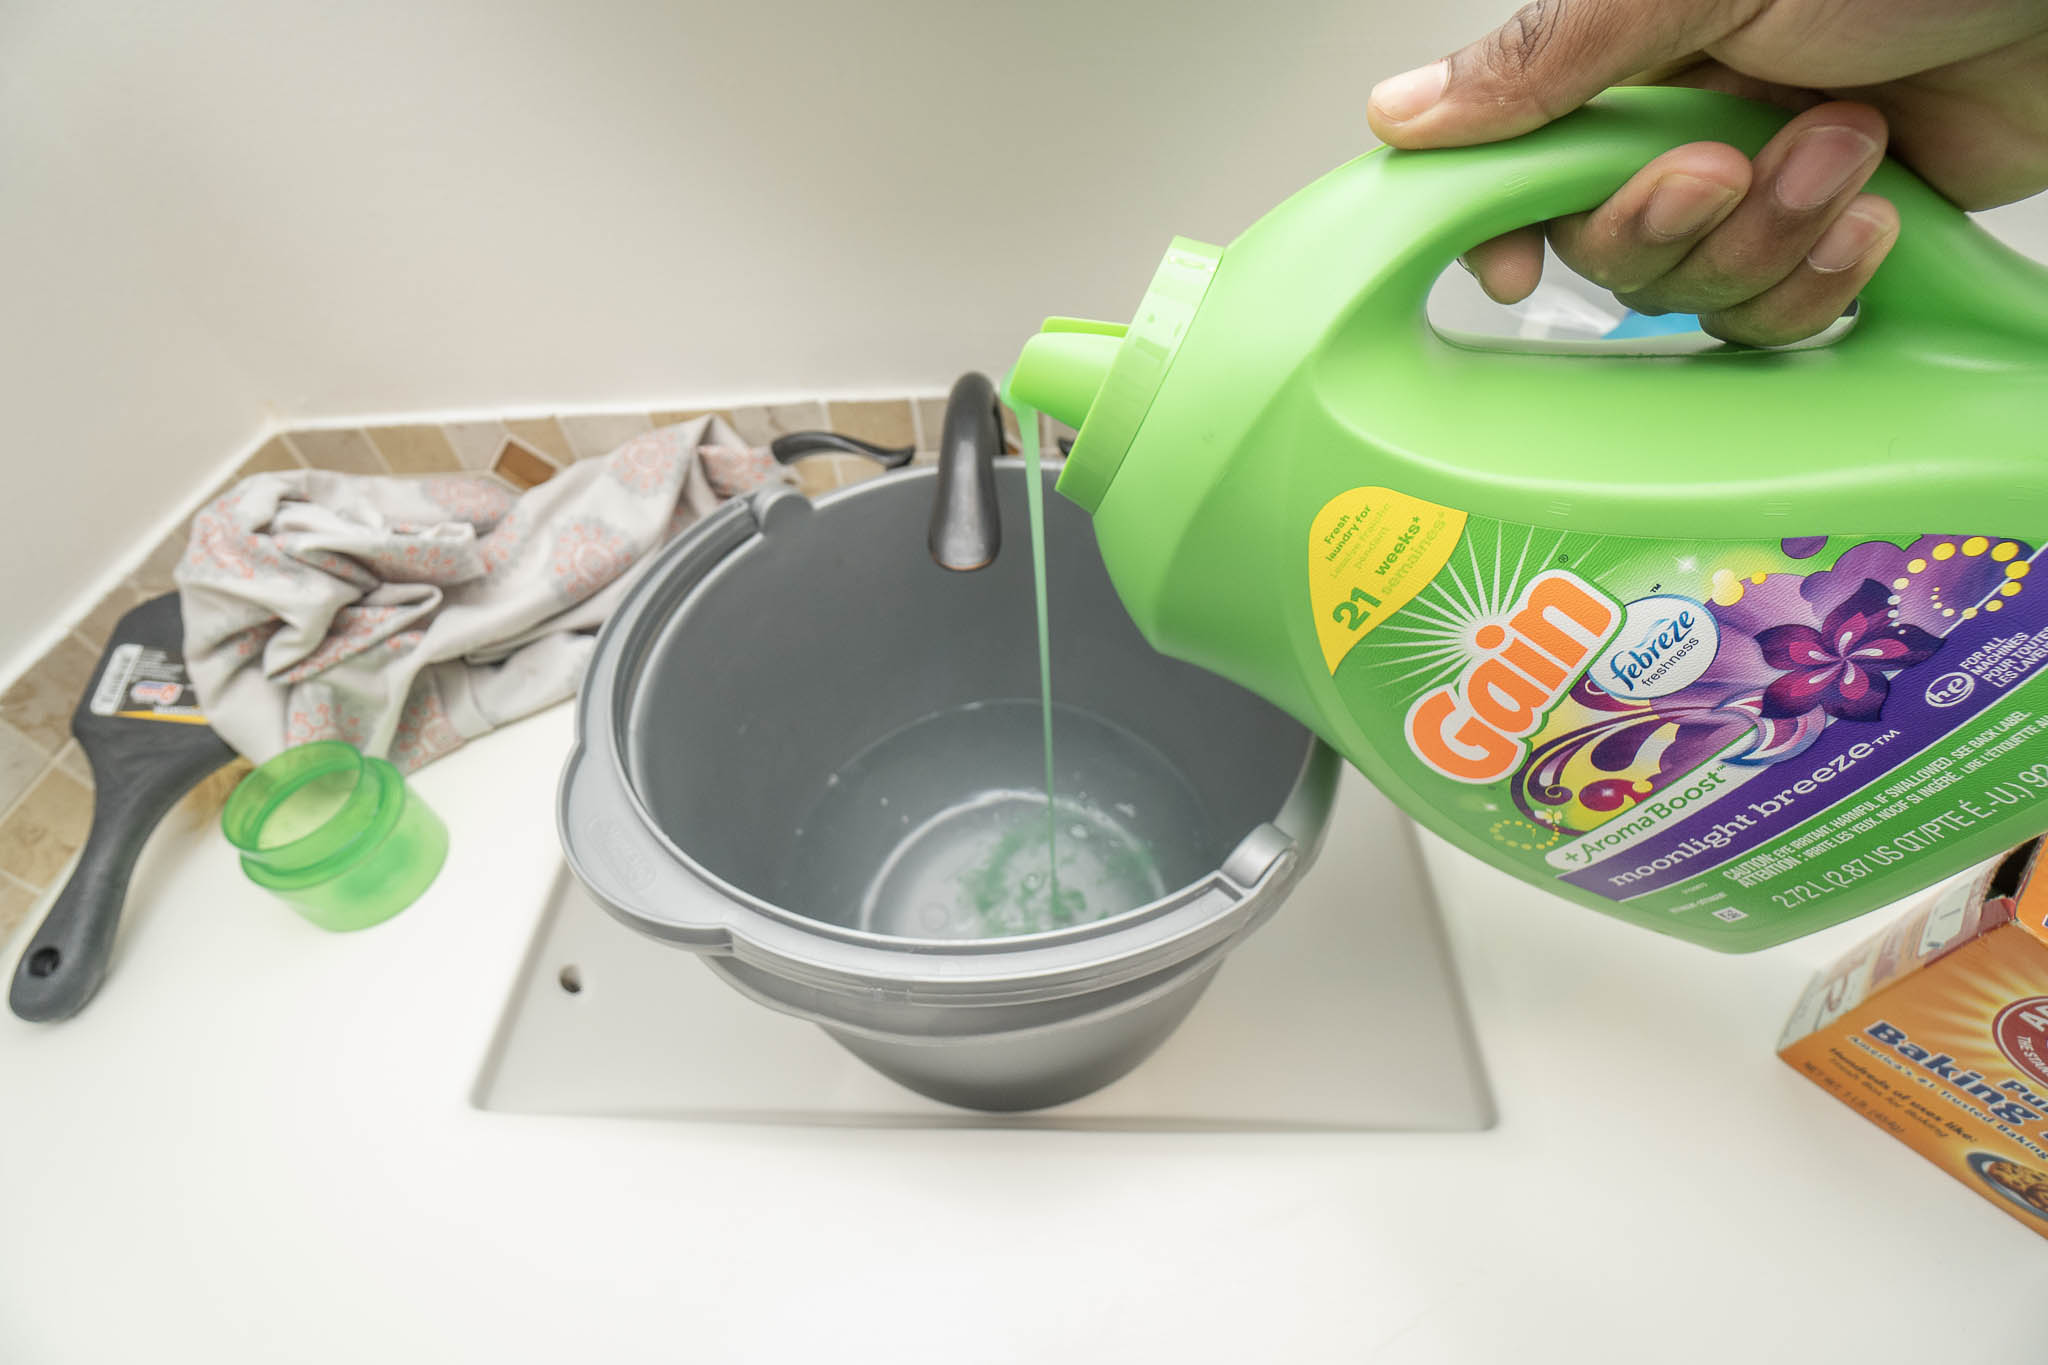 laundry detergent in cleaning container